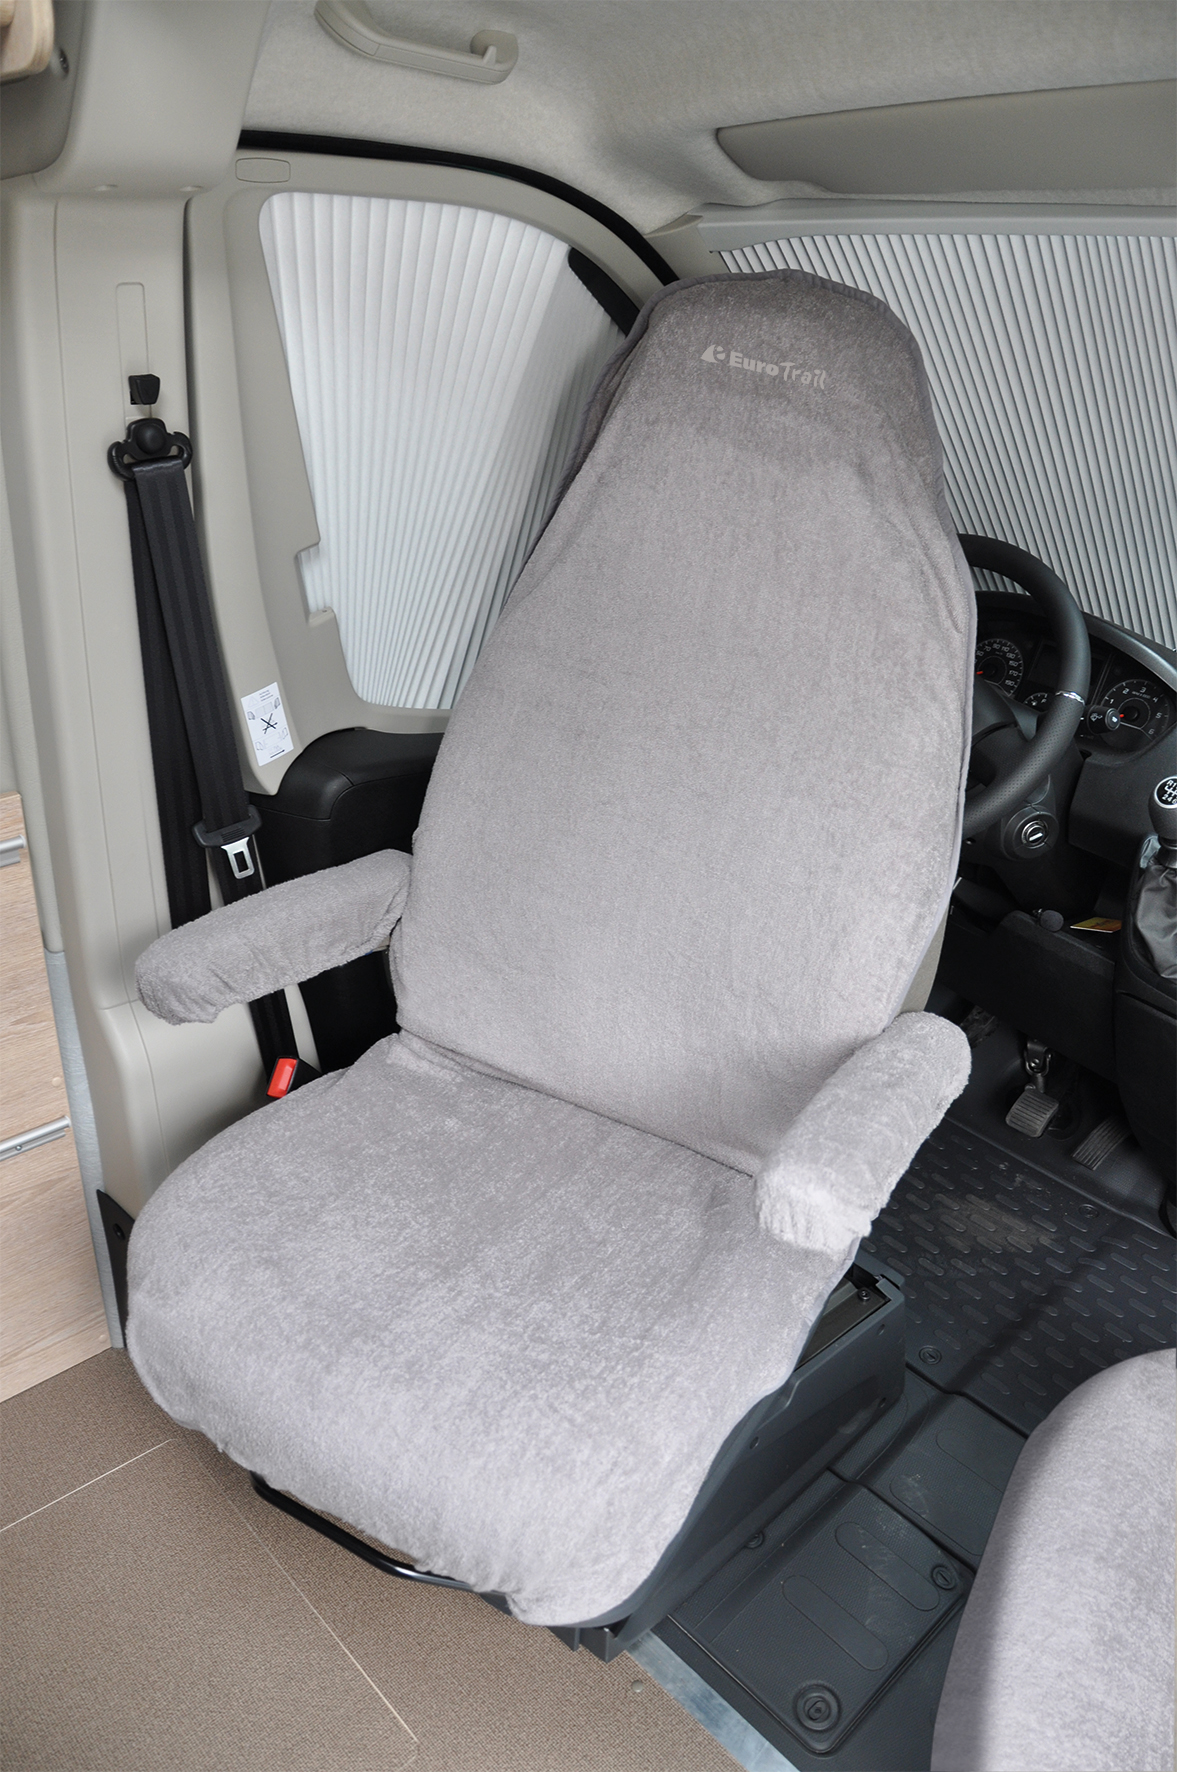 https://eurotrail.info/wp/wp-content/uploads/2020/11/ETCF0978-Toweling-seat-cover-20.jpg